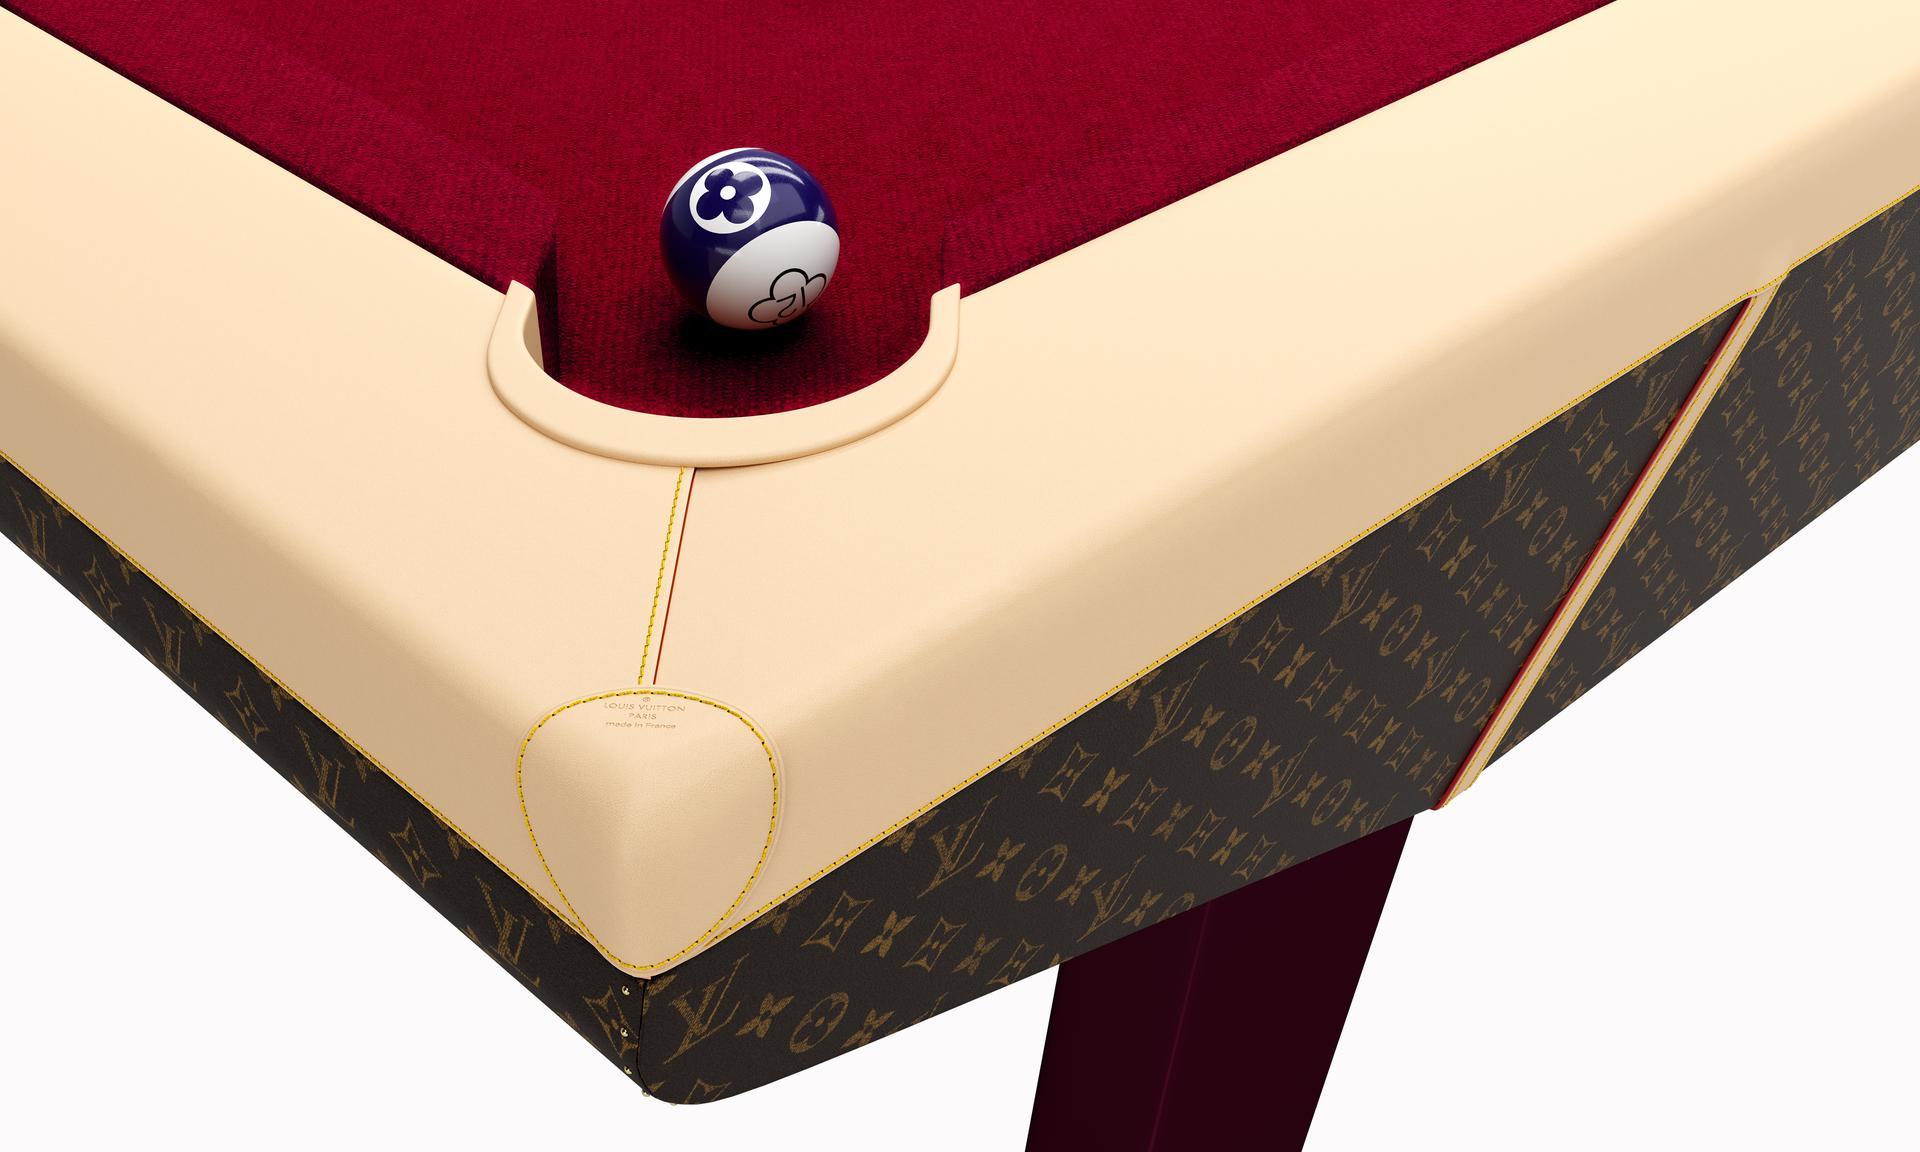 Pot luck: Why Louis Vuitton's Dh435,000 billiards table is a game